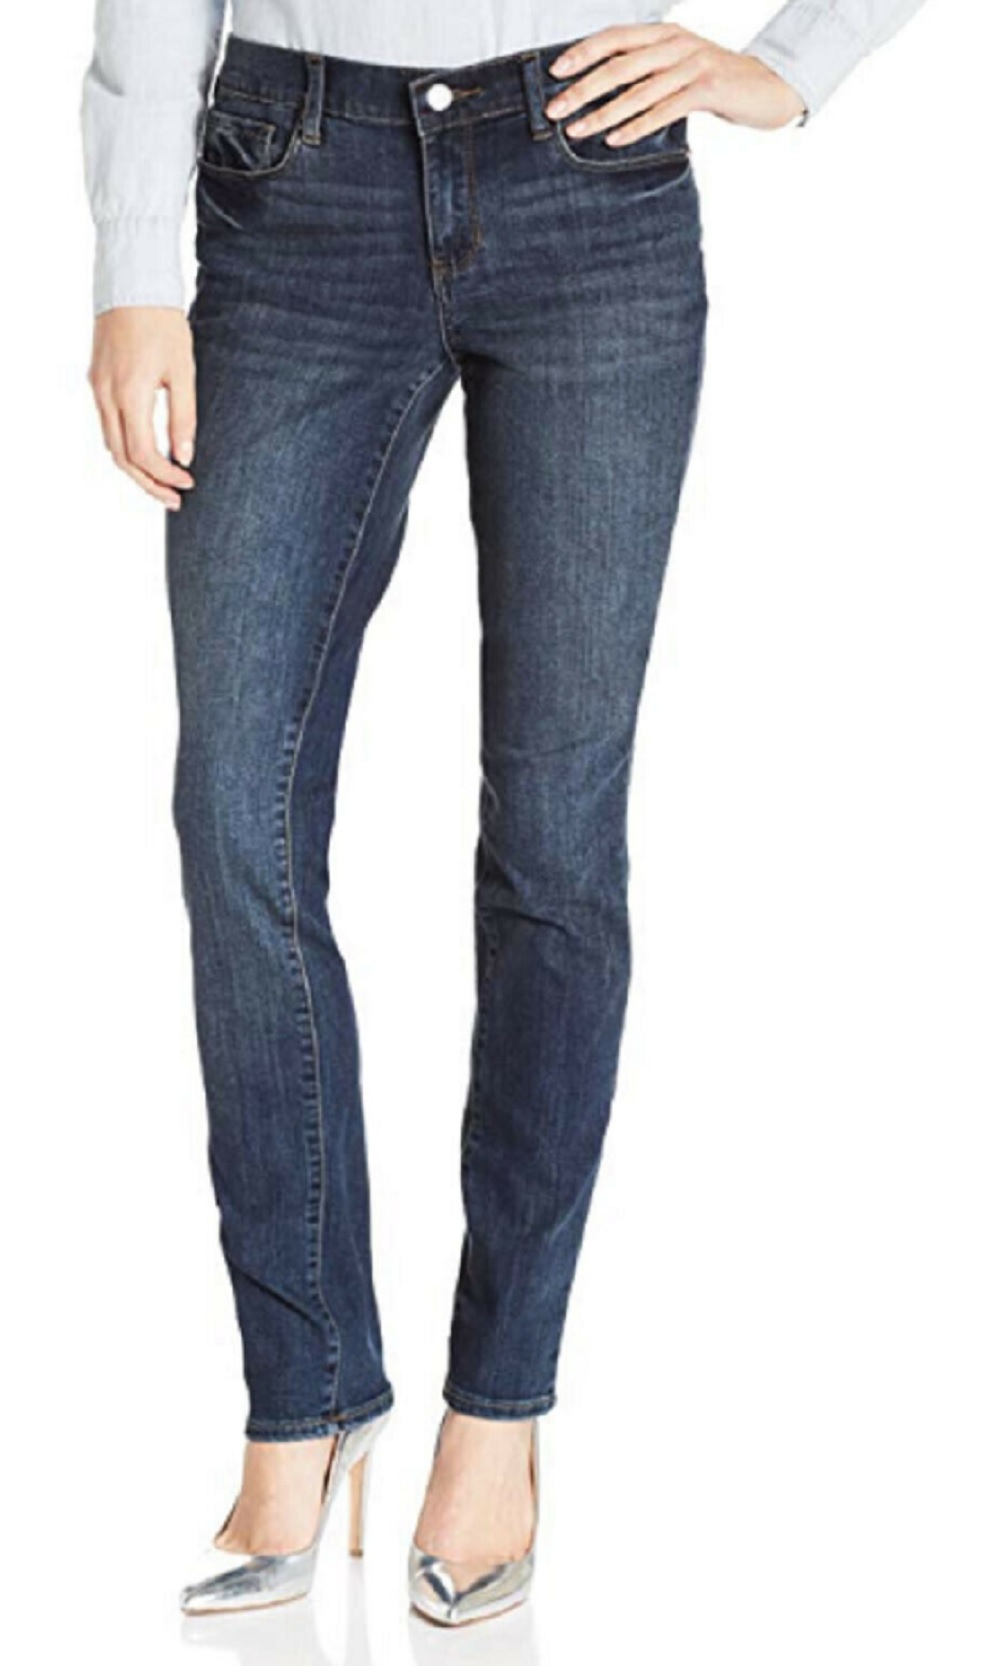 DKNY Jeans Ladies' Soho Classic Skinny Jeans Chelsea Wash (4x30) - image 1 of 2